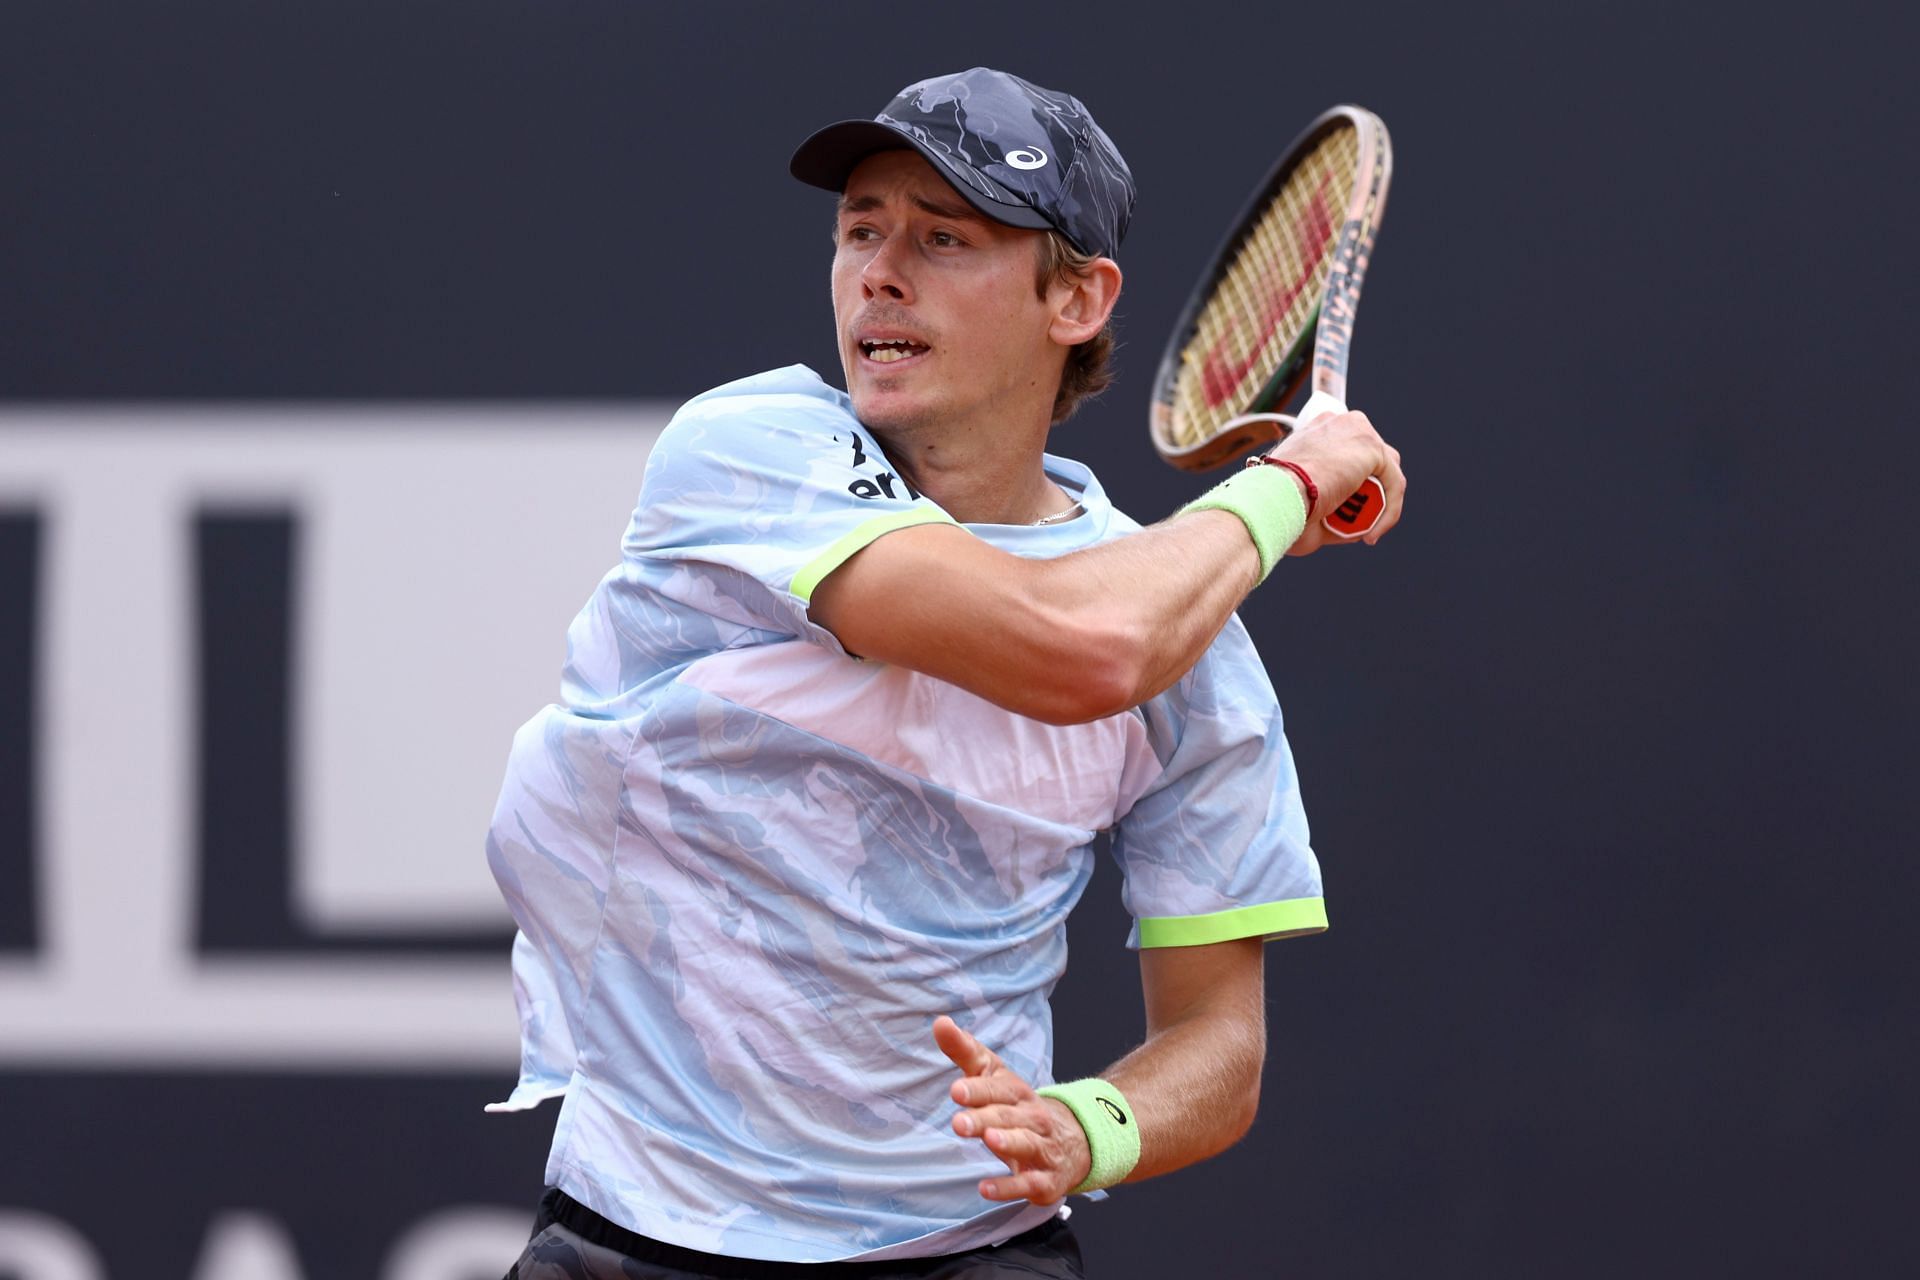 De Minaur is into his first ATP Masters 1000 semifinal.